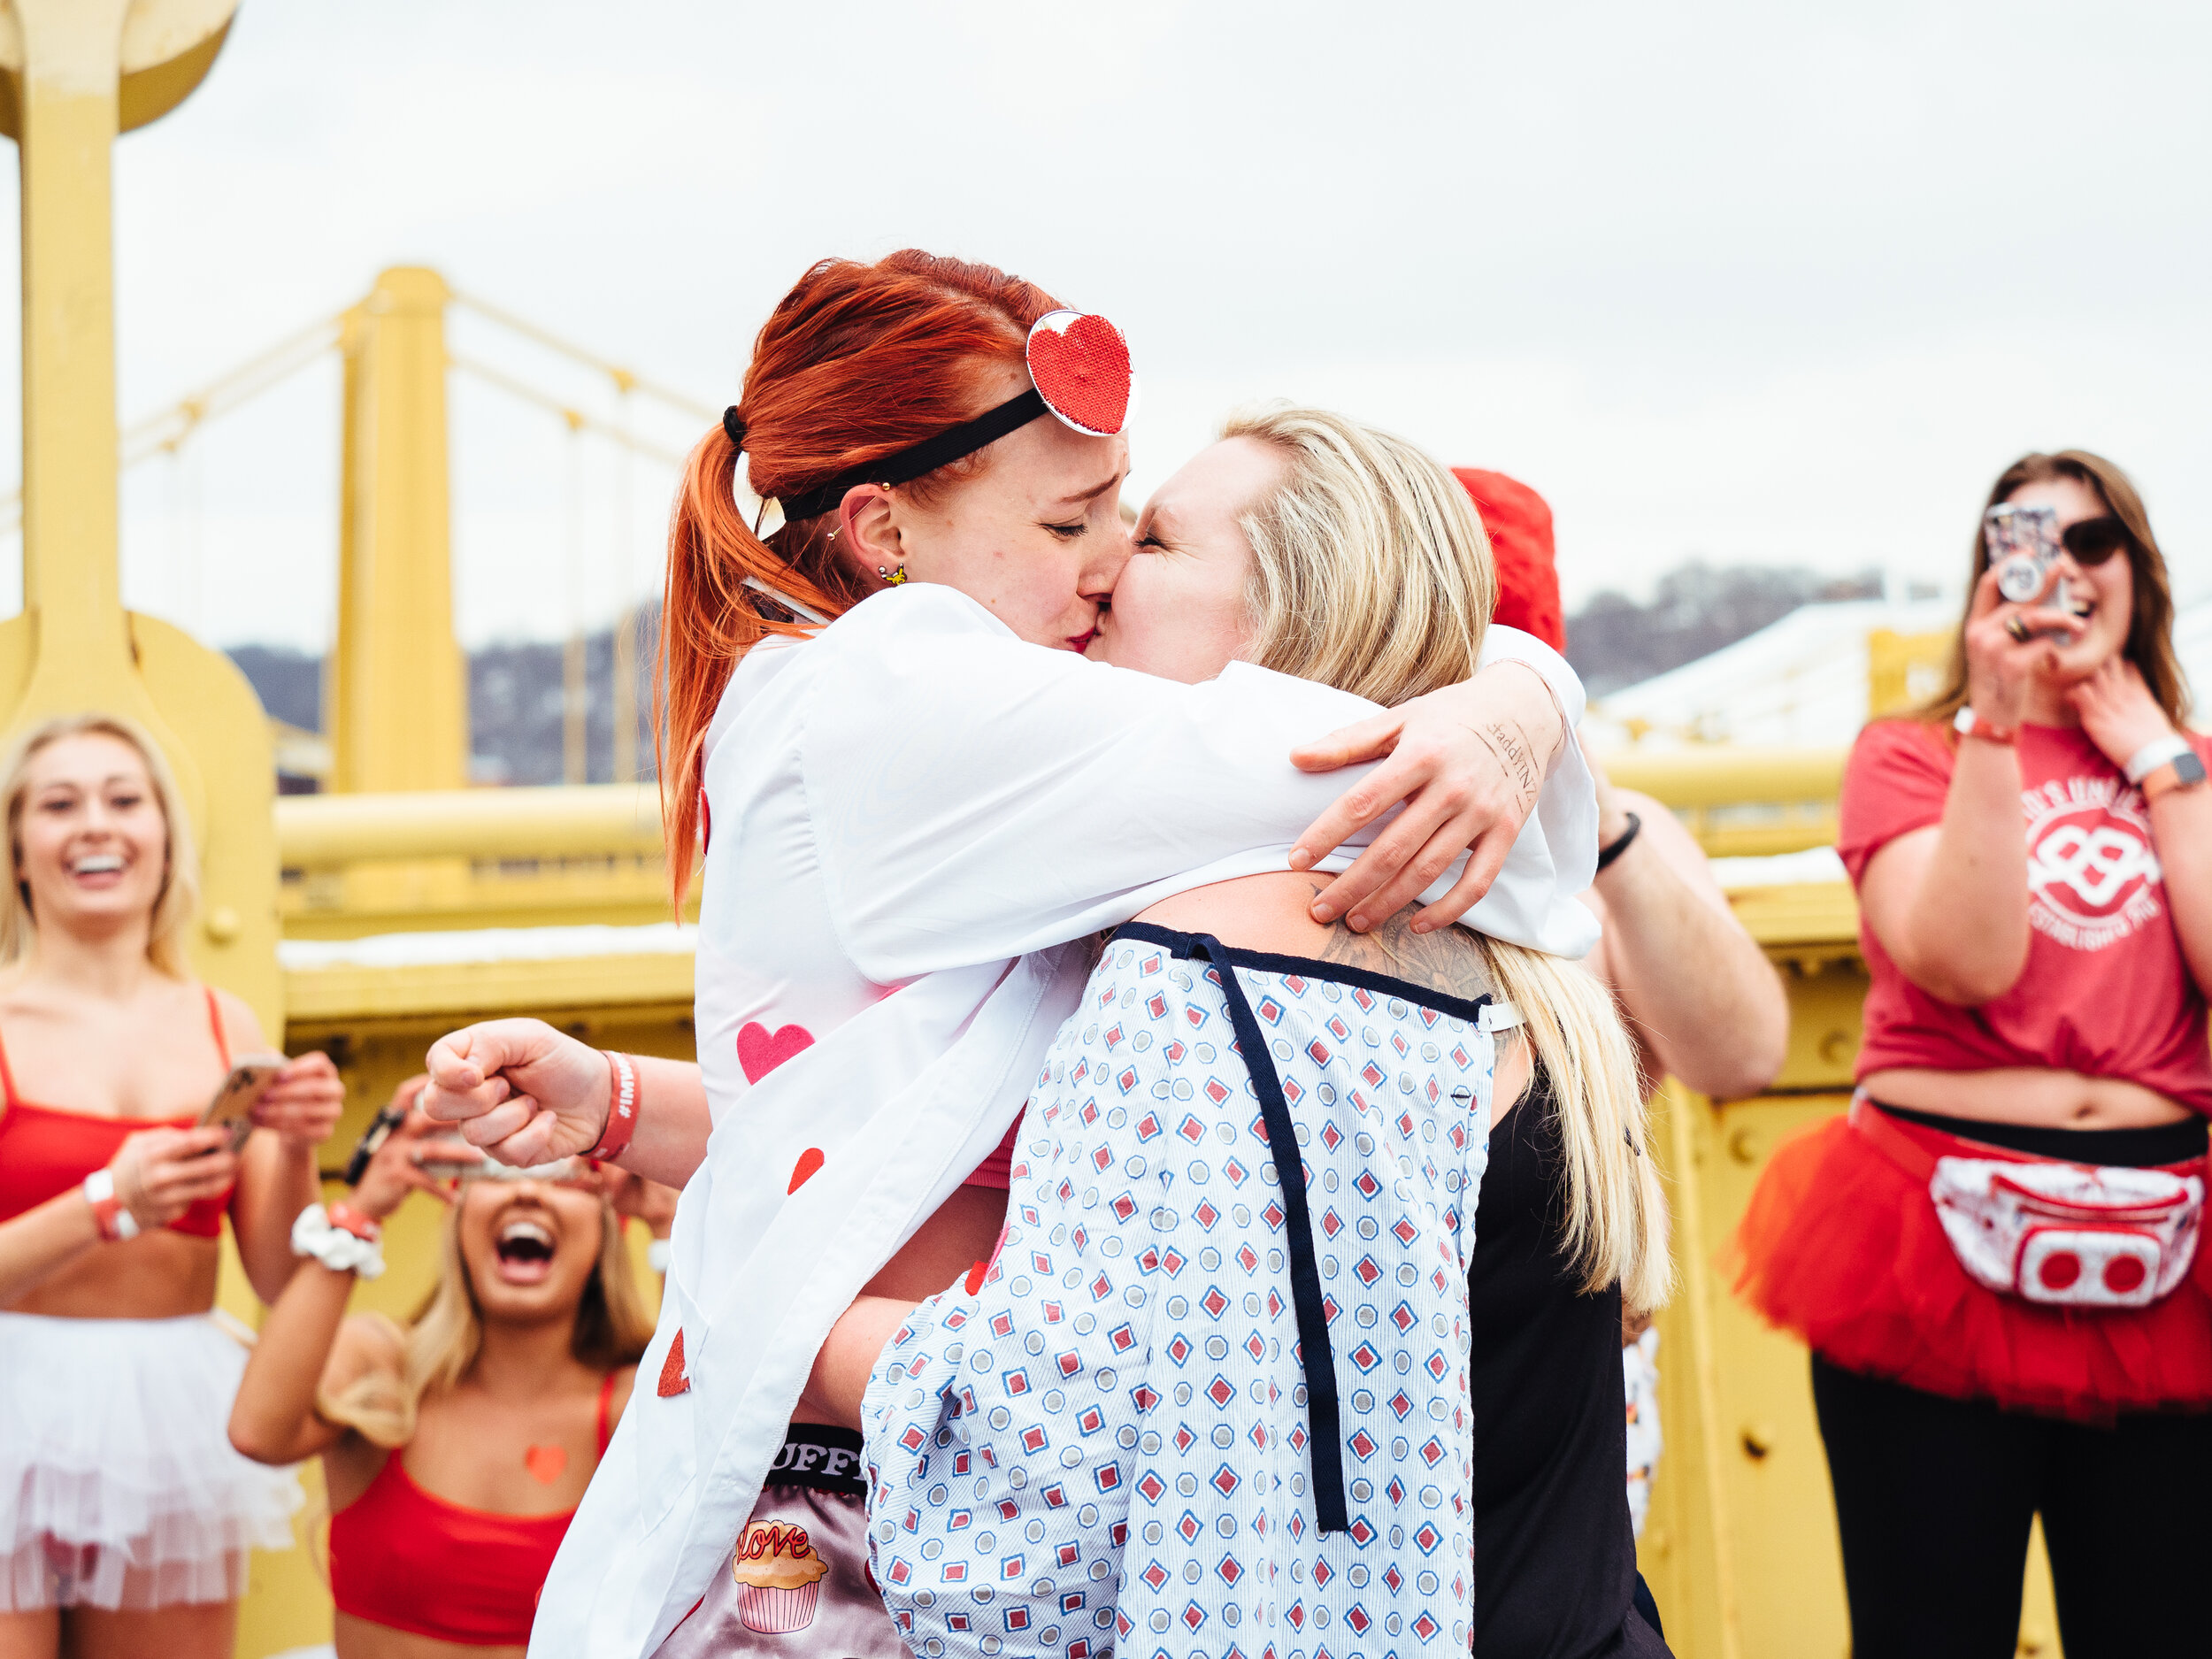  Theresa Maxon, 27, of Morgantown (right) shares a kiss with Marcie Koenig, 26, of Pittsburgh after Maxon proposed to Koenig on the Robert Clemente Bridge during Cupid’s Undie Run on Saturday, Feb. 8, 2020.  